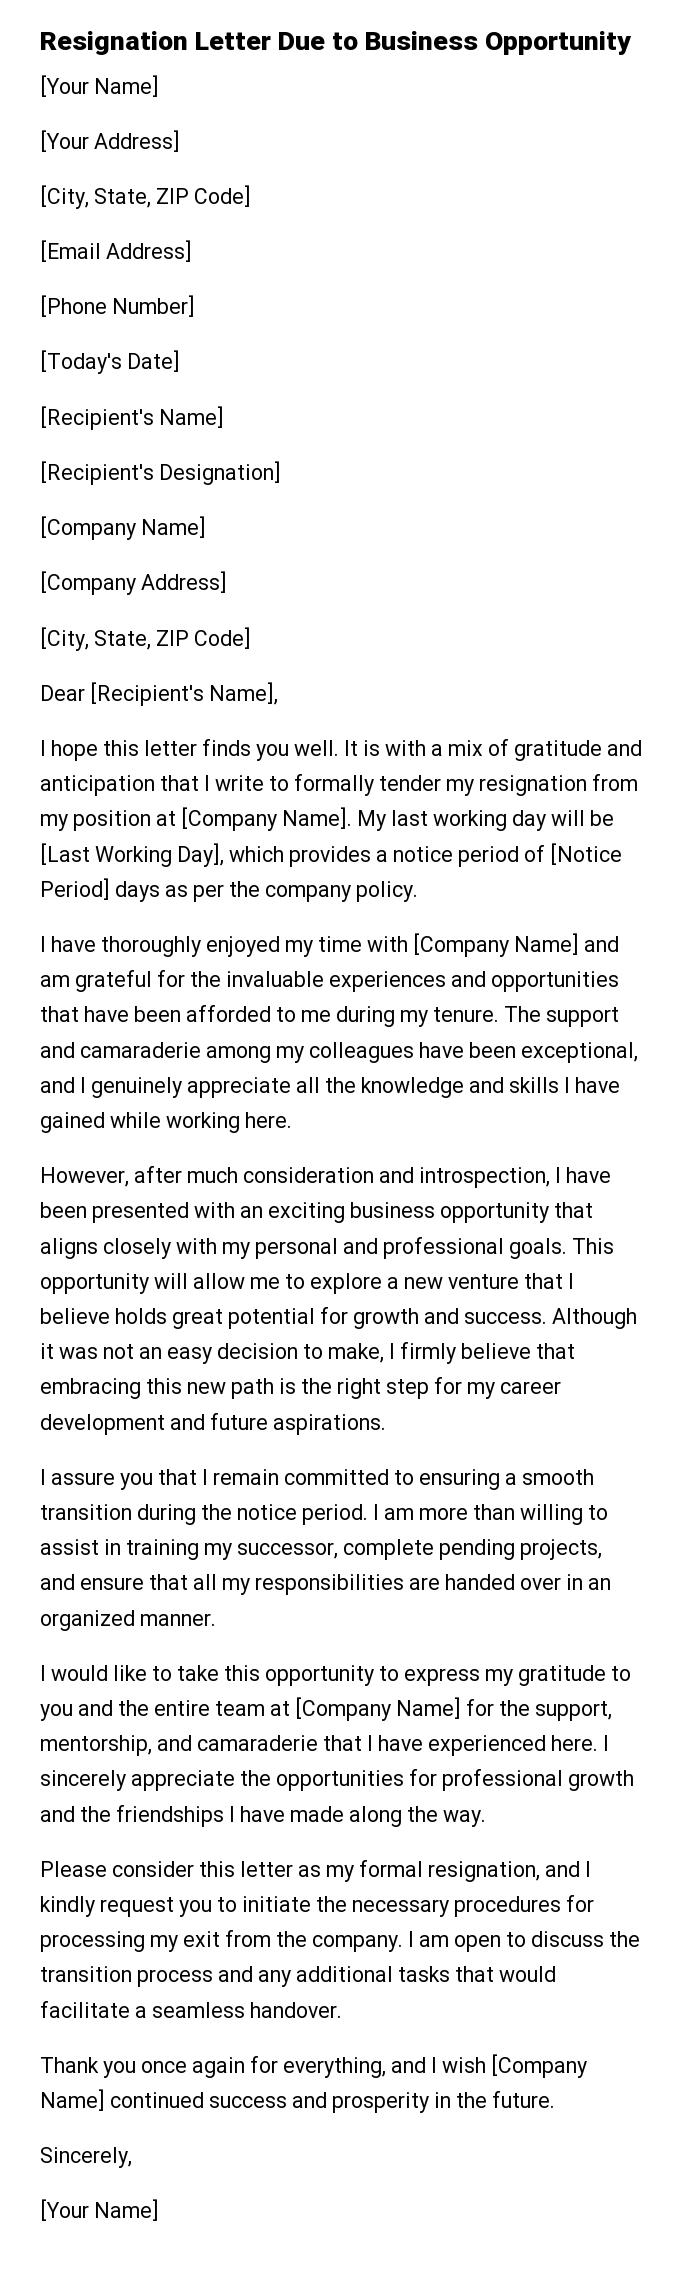 Resignation Letter Due to Business Opportunity